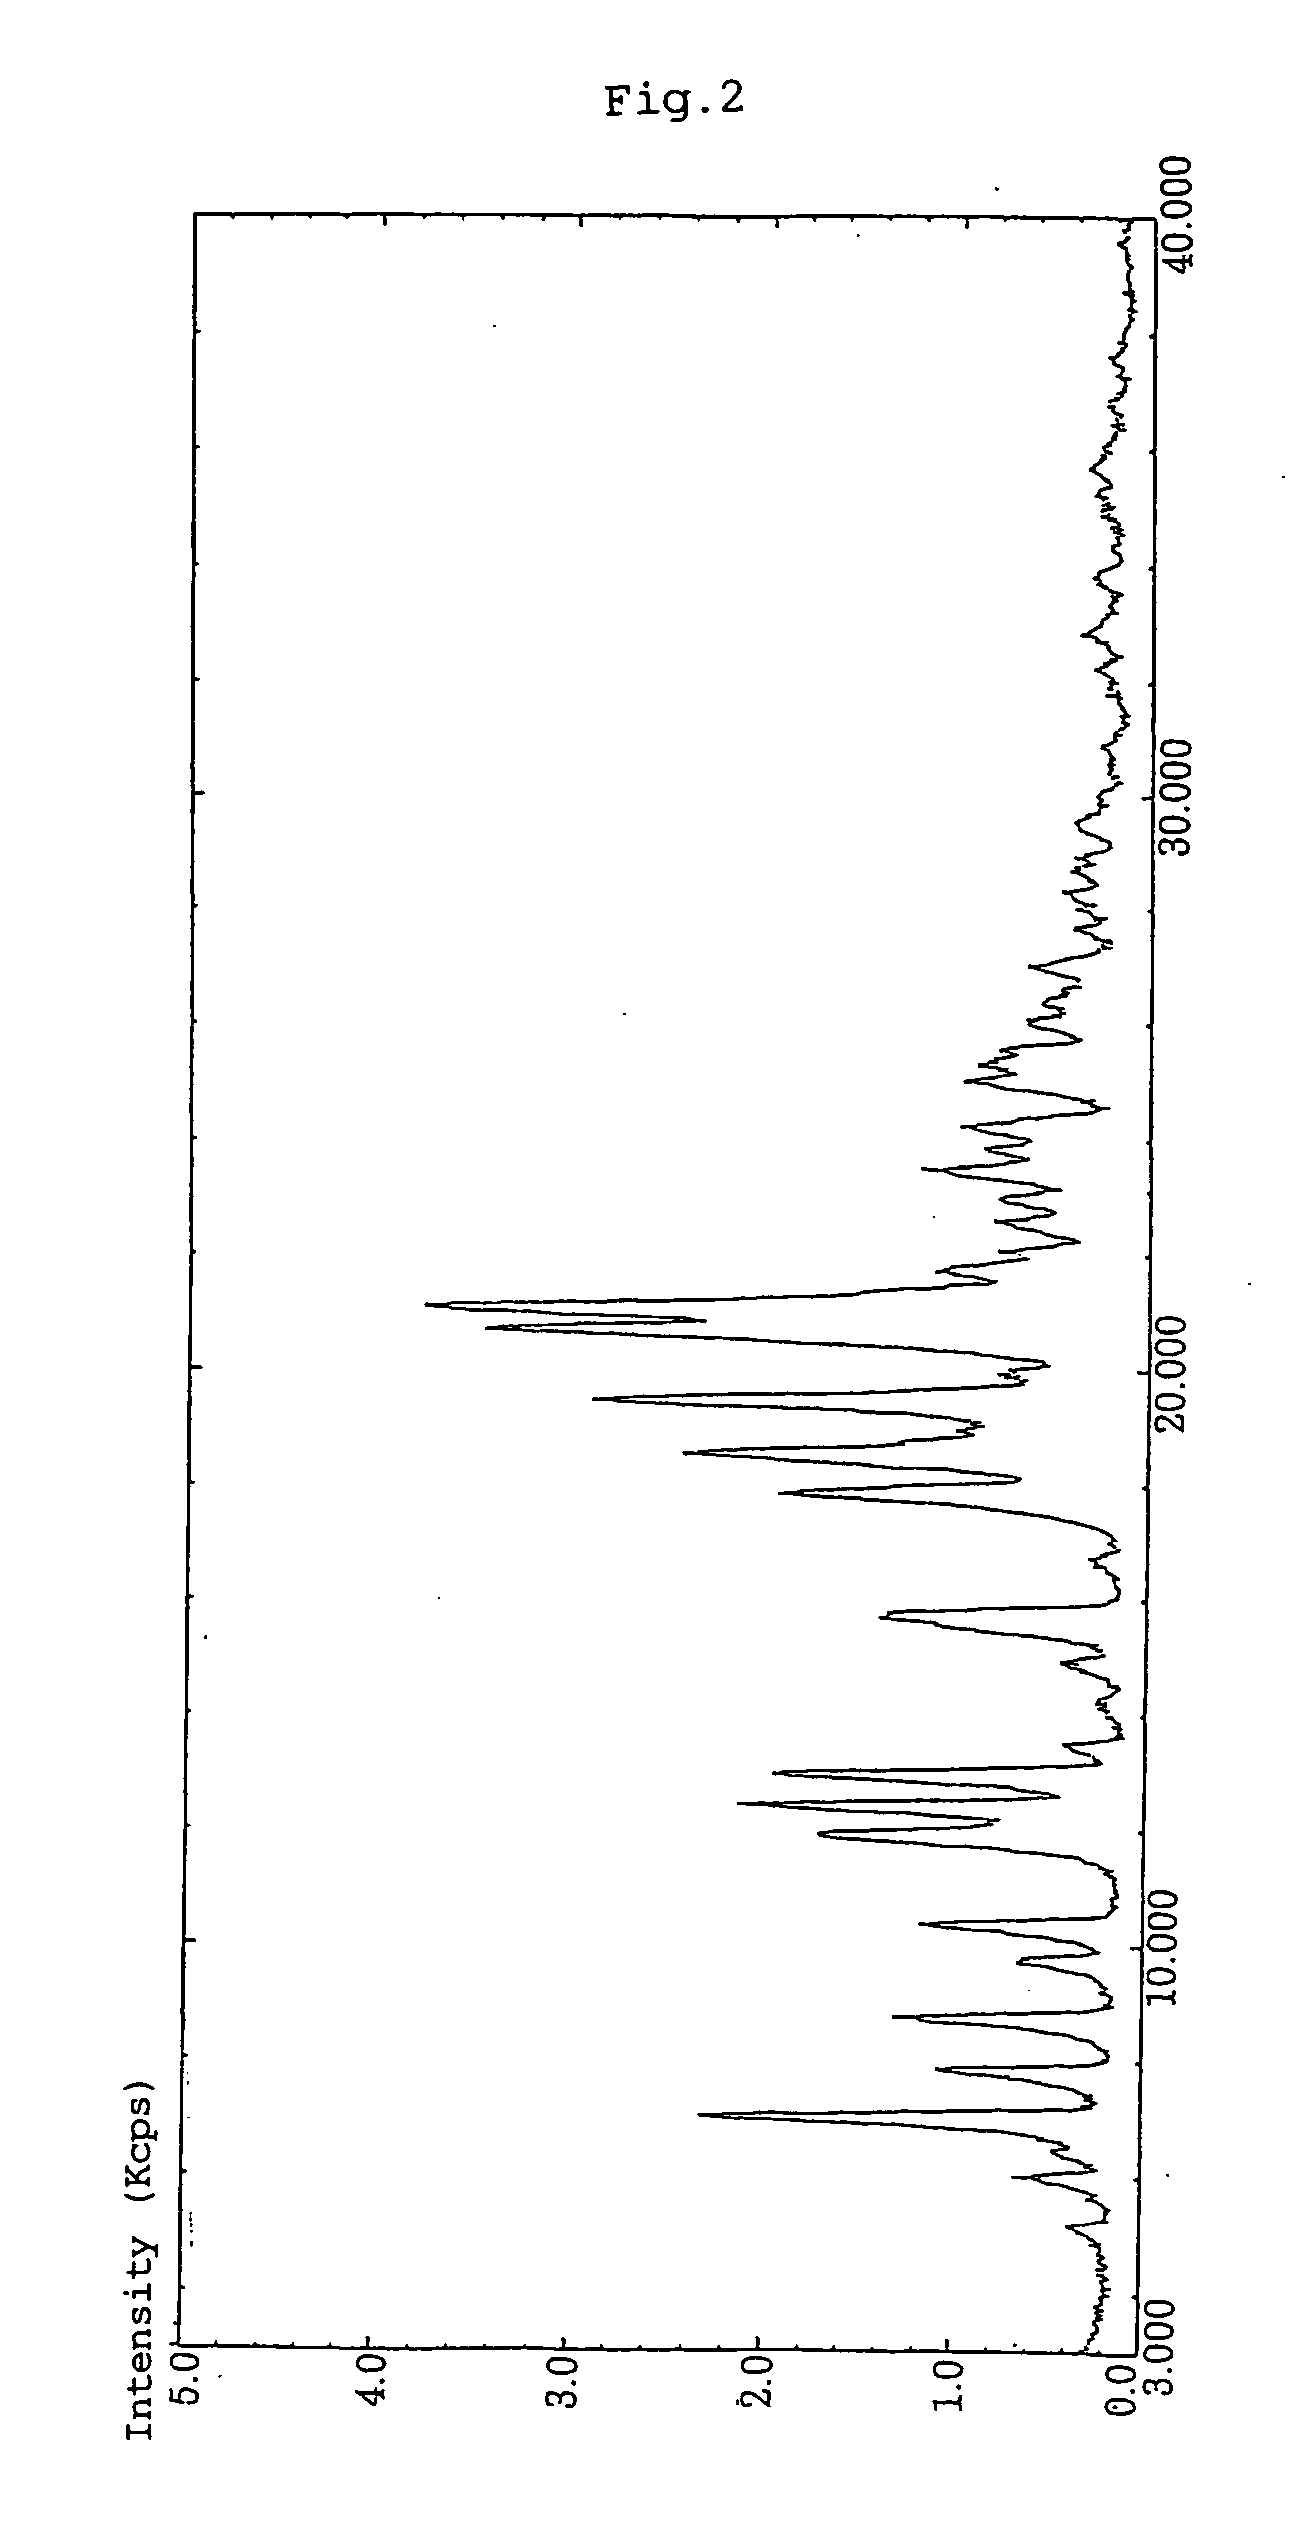 Crystal for oral solid drug and oral solid drug for dysuria treatment containing the same